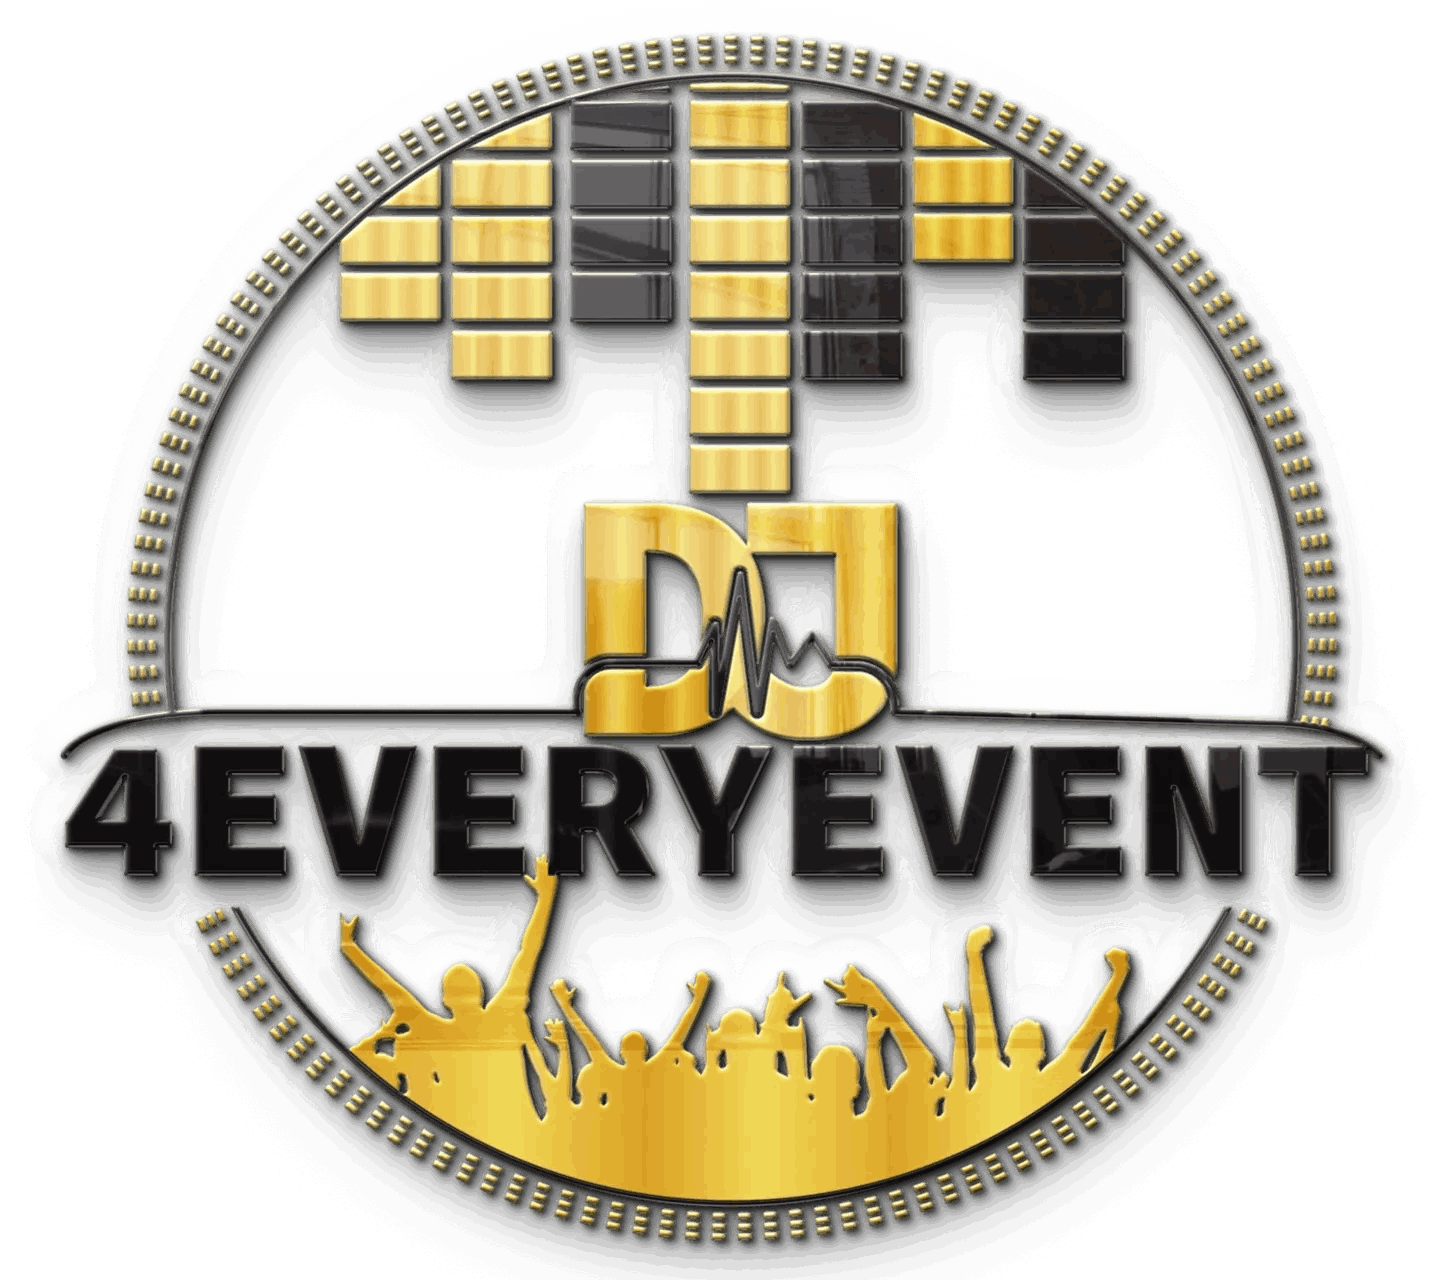 A picture of the logo for dj 4 everyevent.